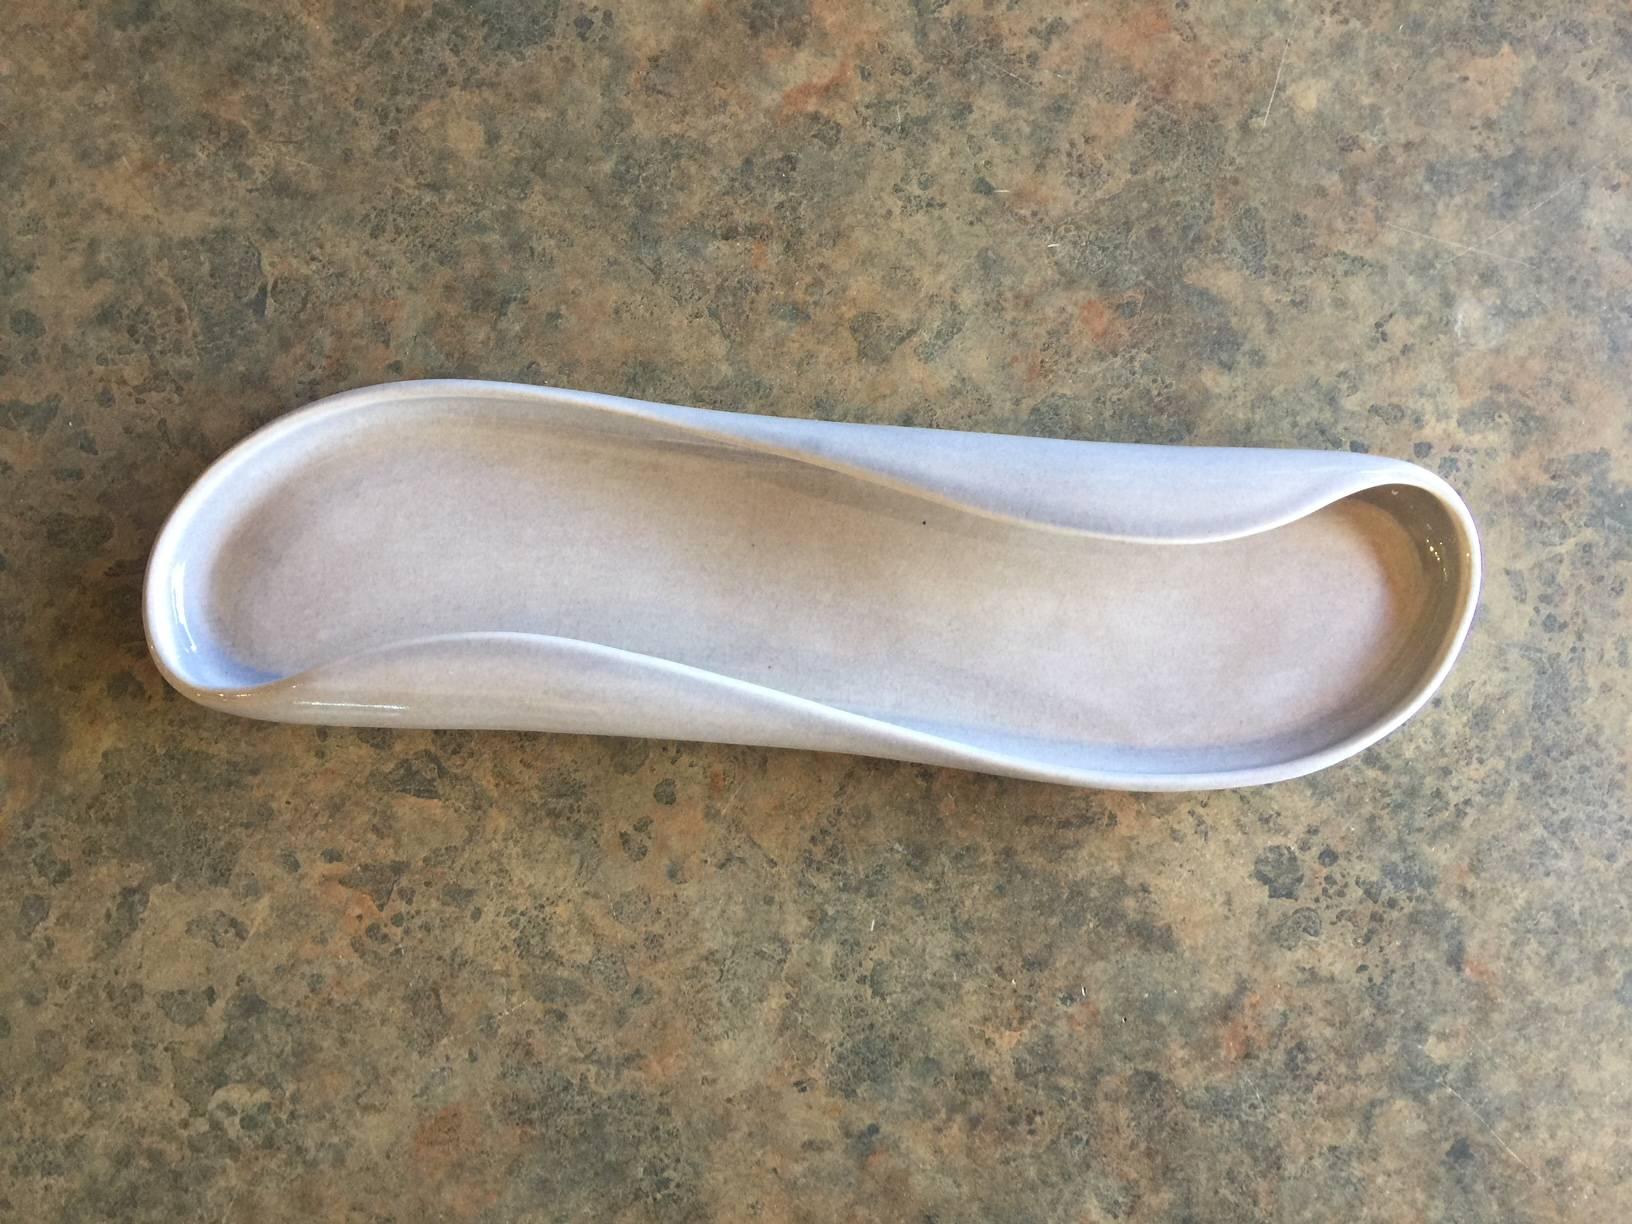 Glazed American Modern Ceramic Celery Tray by Russel Wright for Steubenville Pottery